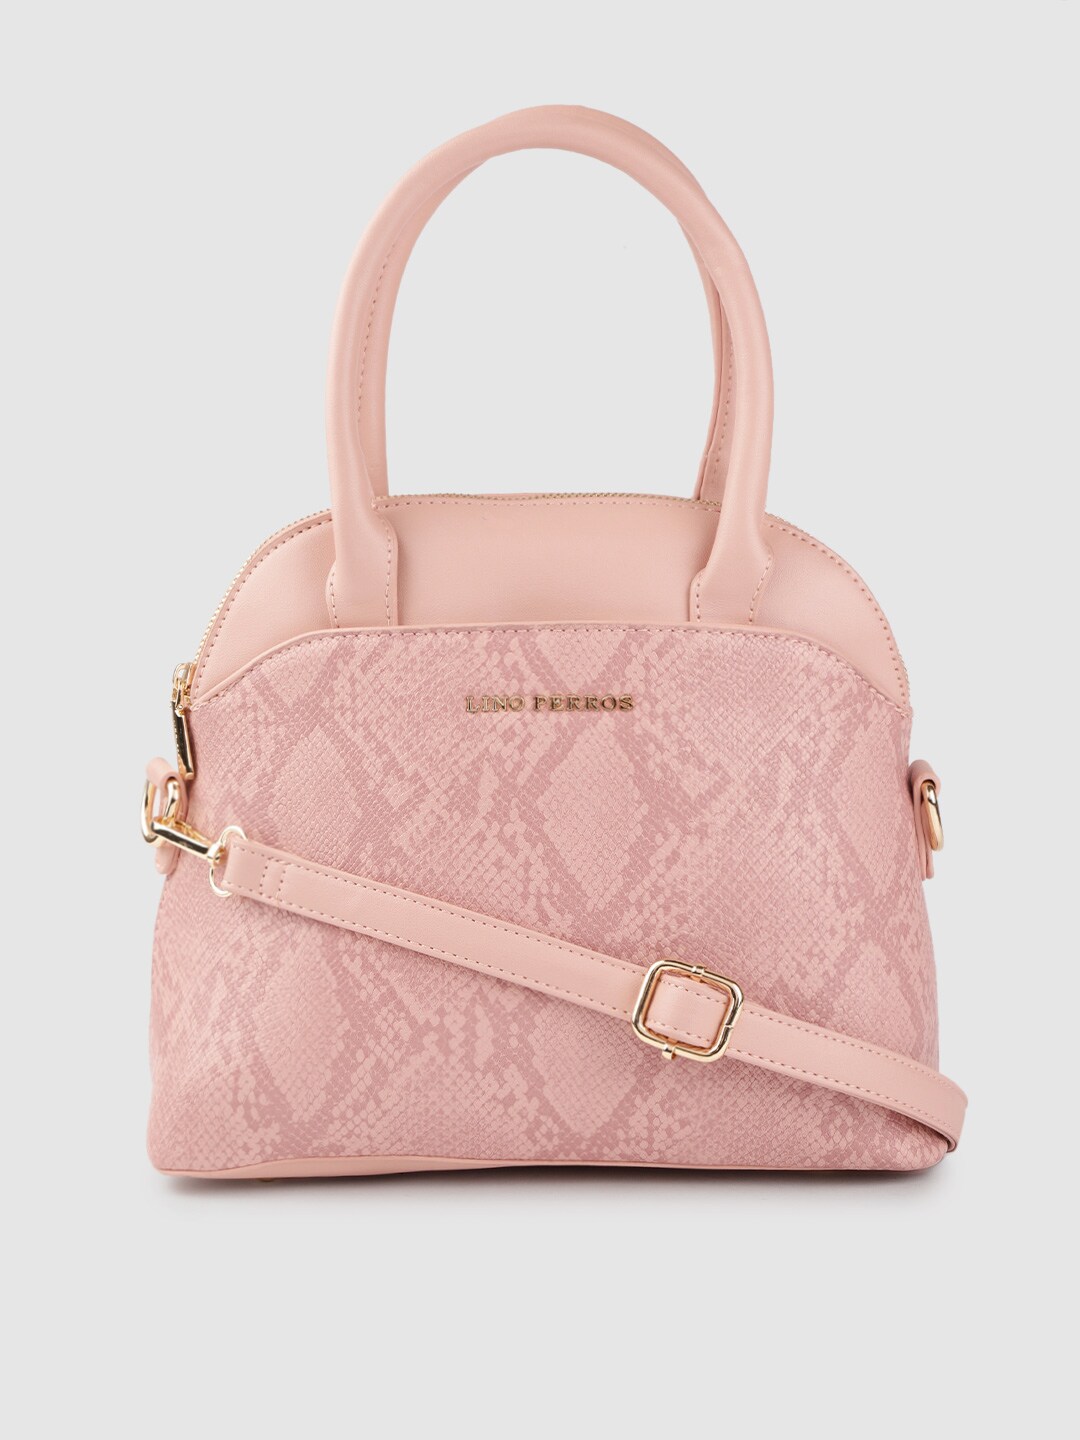 Lino Perros Pink Snakeskin Textured Handheld Bag with Detachable Sling Strap Price in India